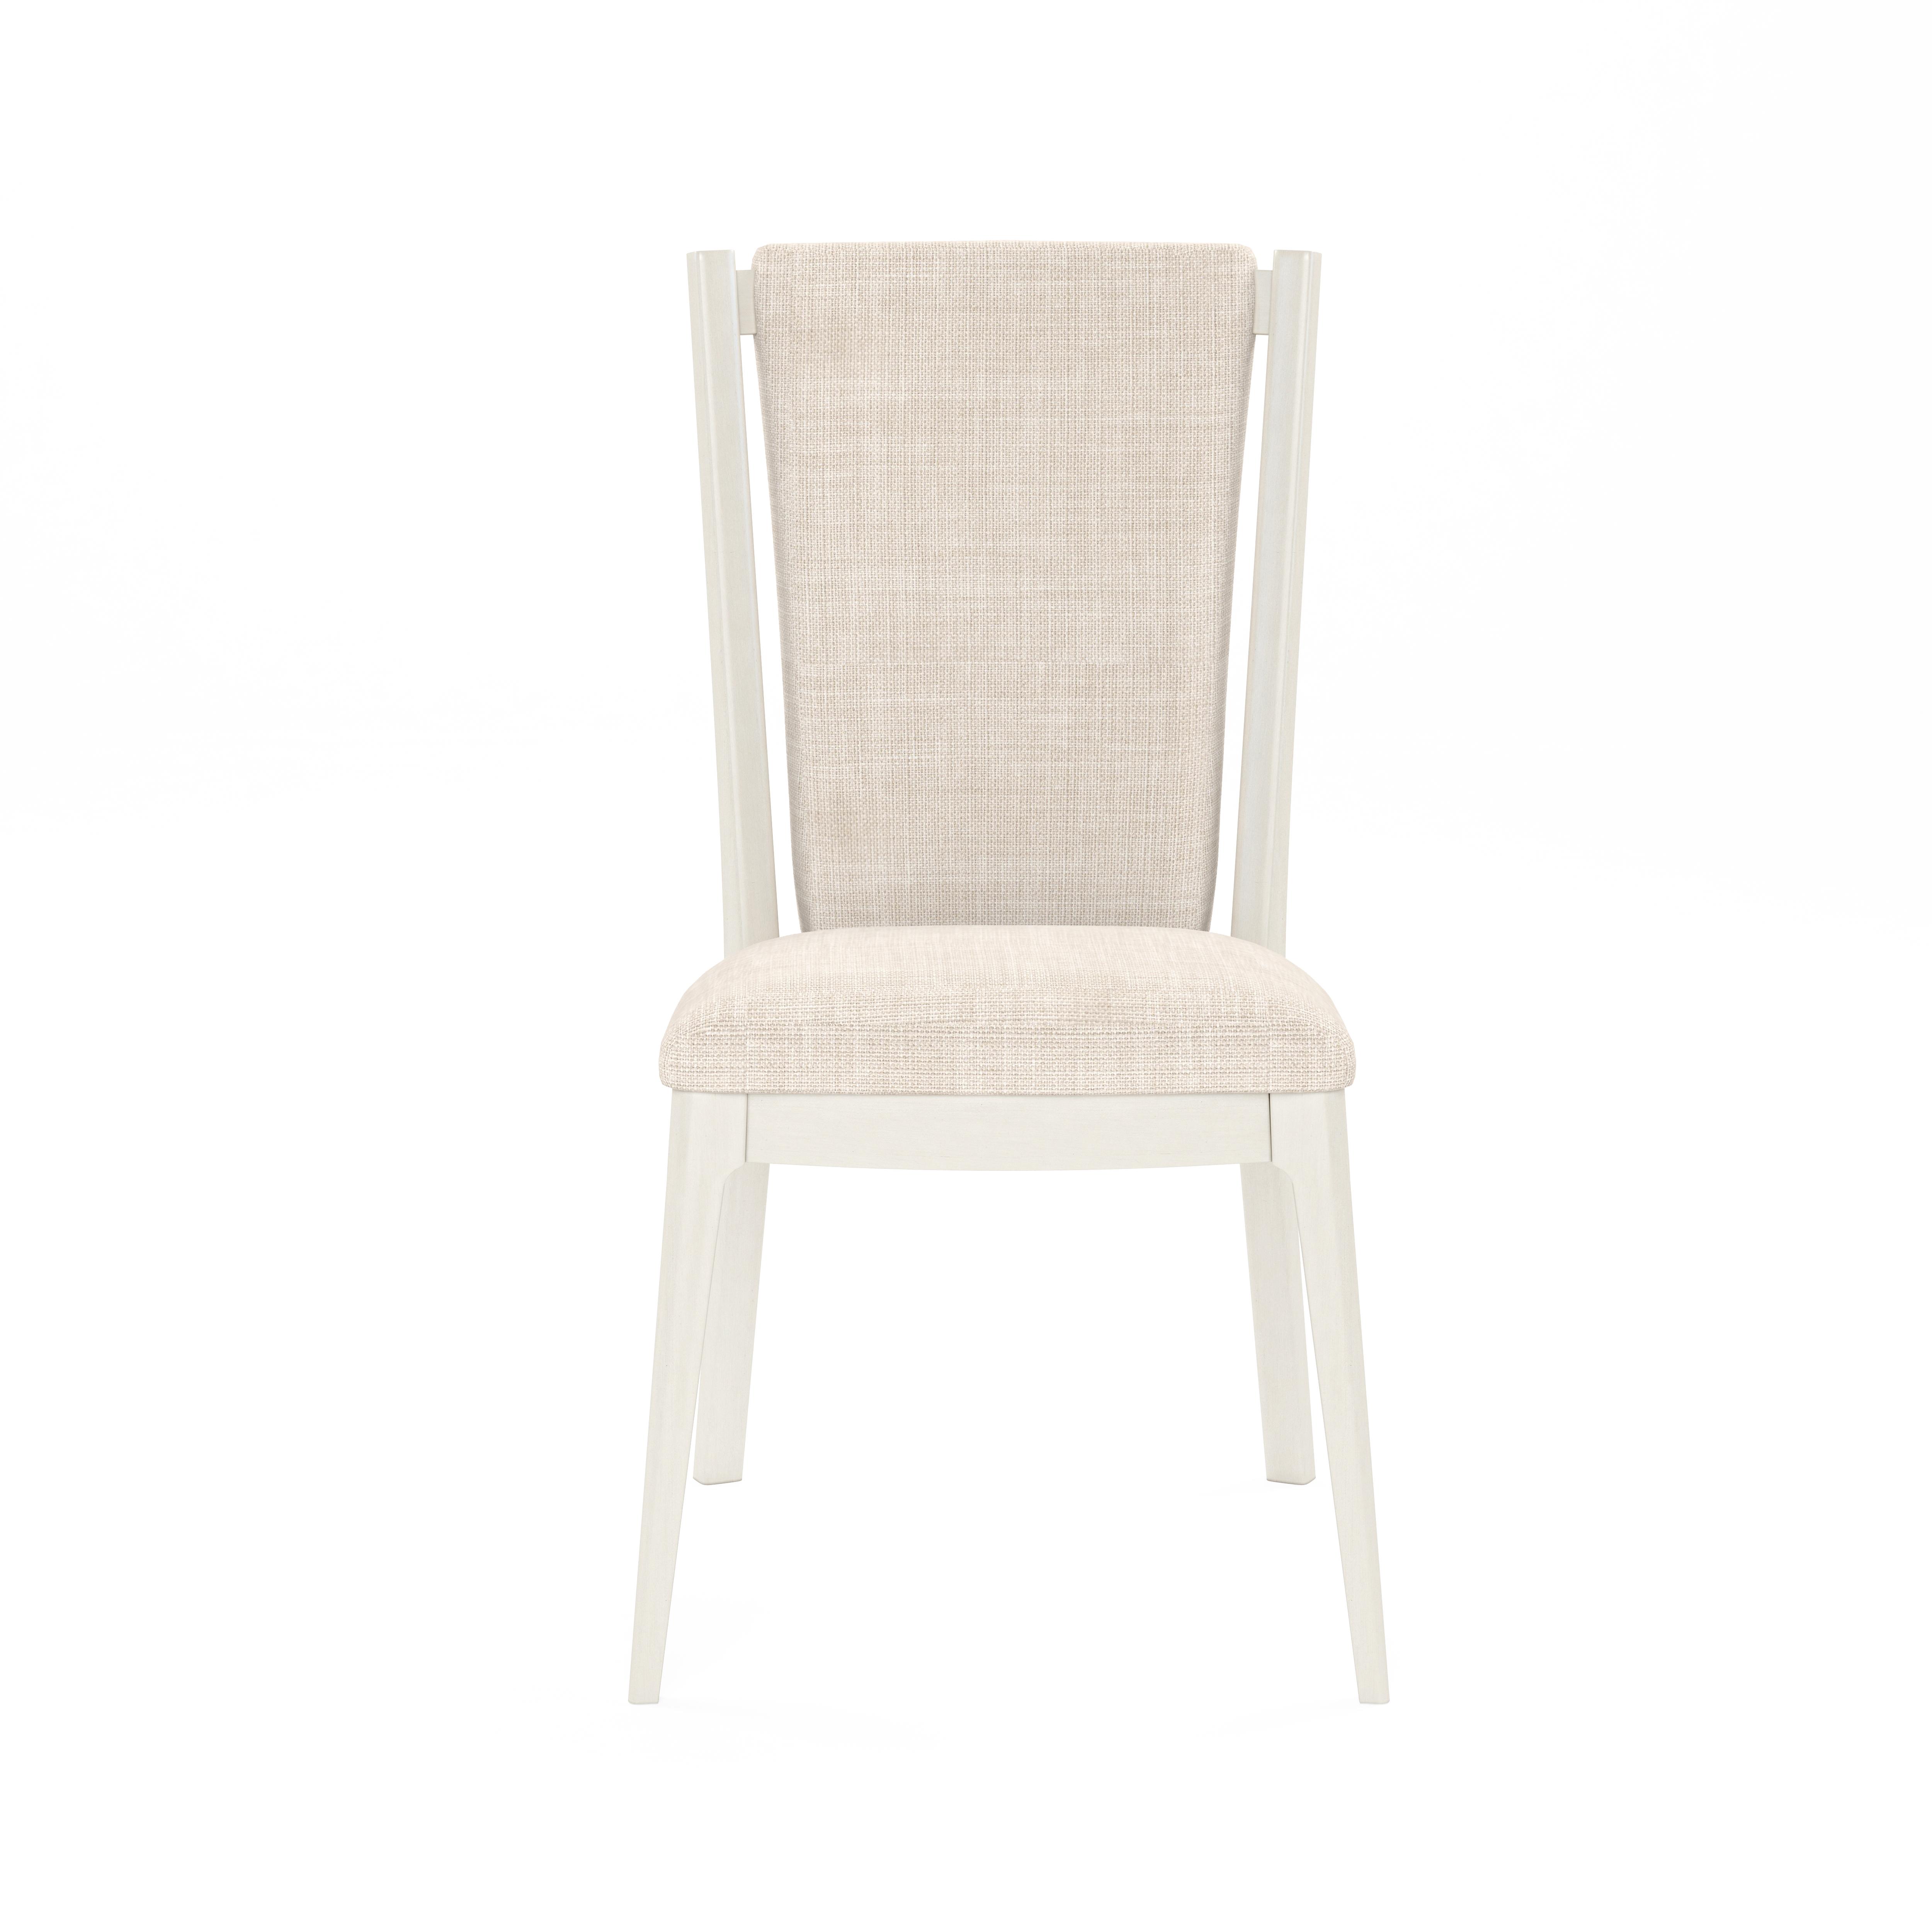 Modern, Casual Side Chair Set Blanc 289206-1017-2pcs in Beige Fabric